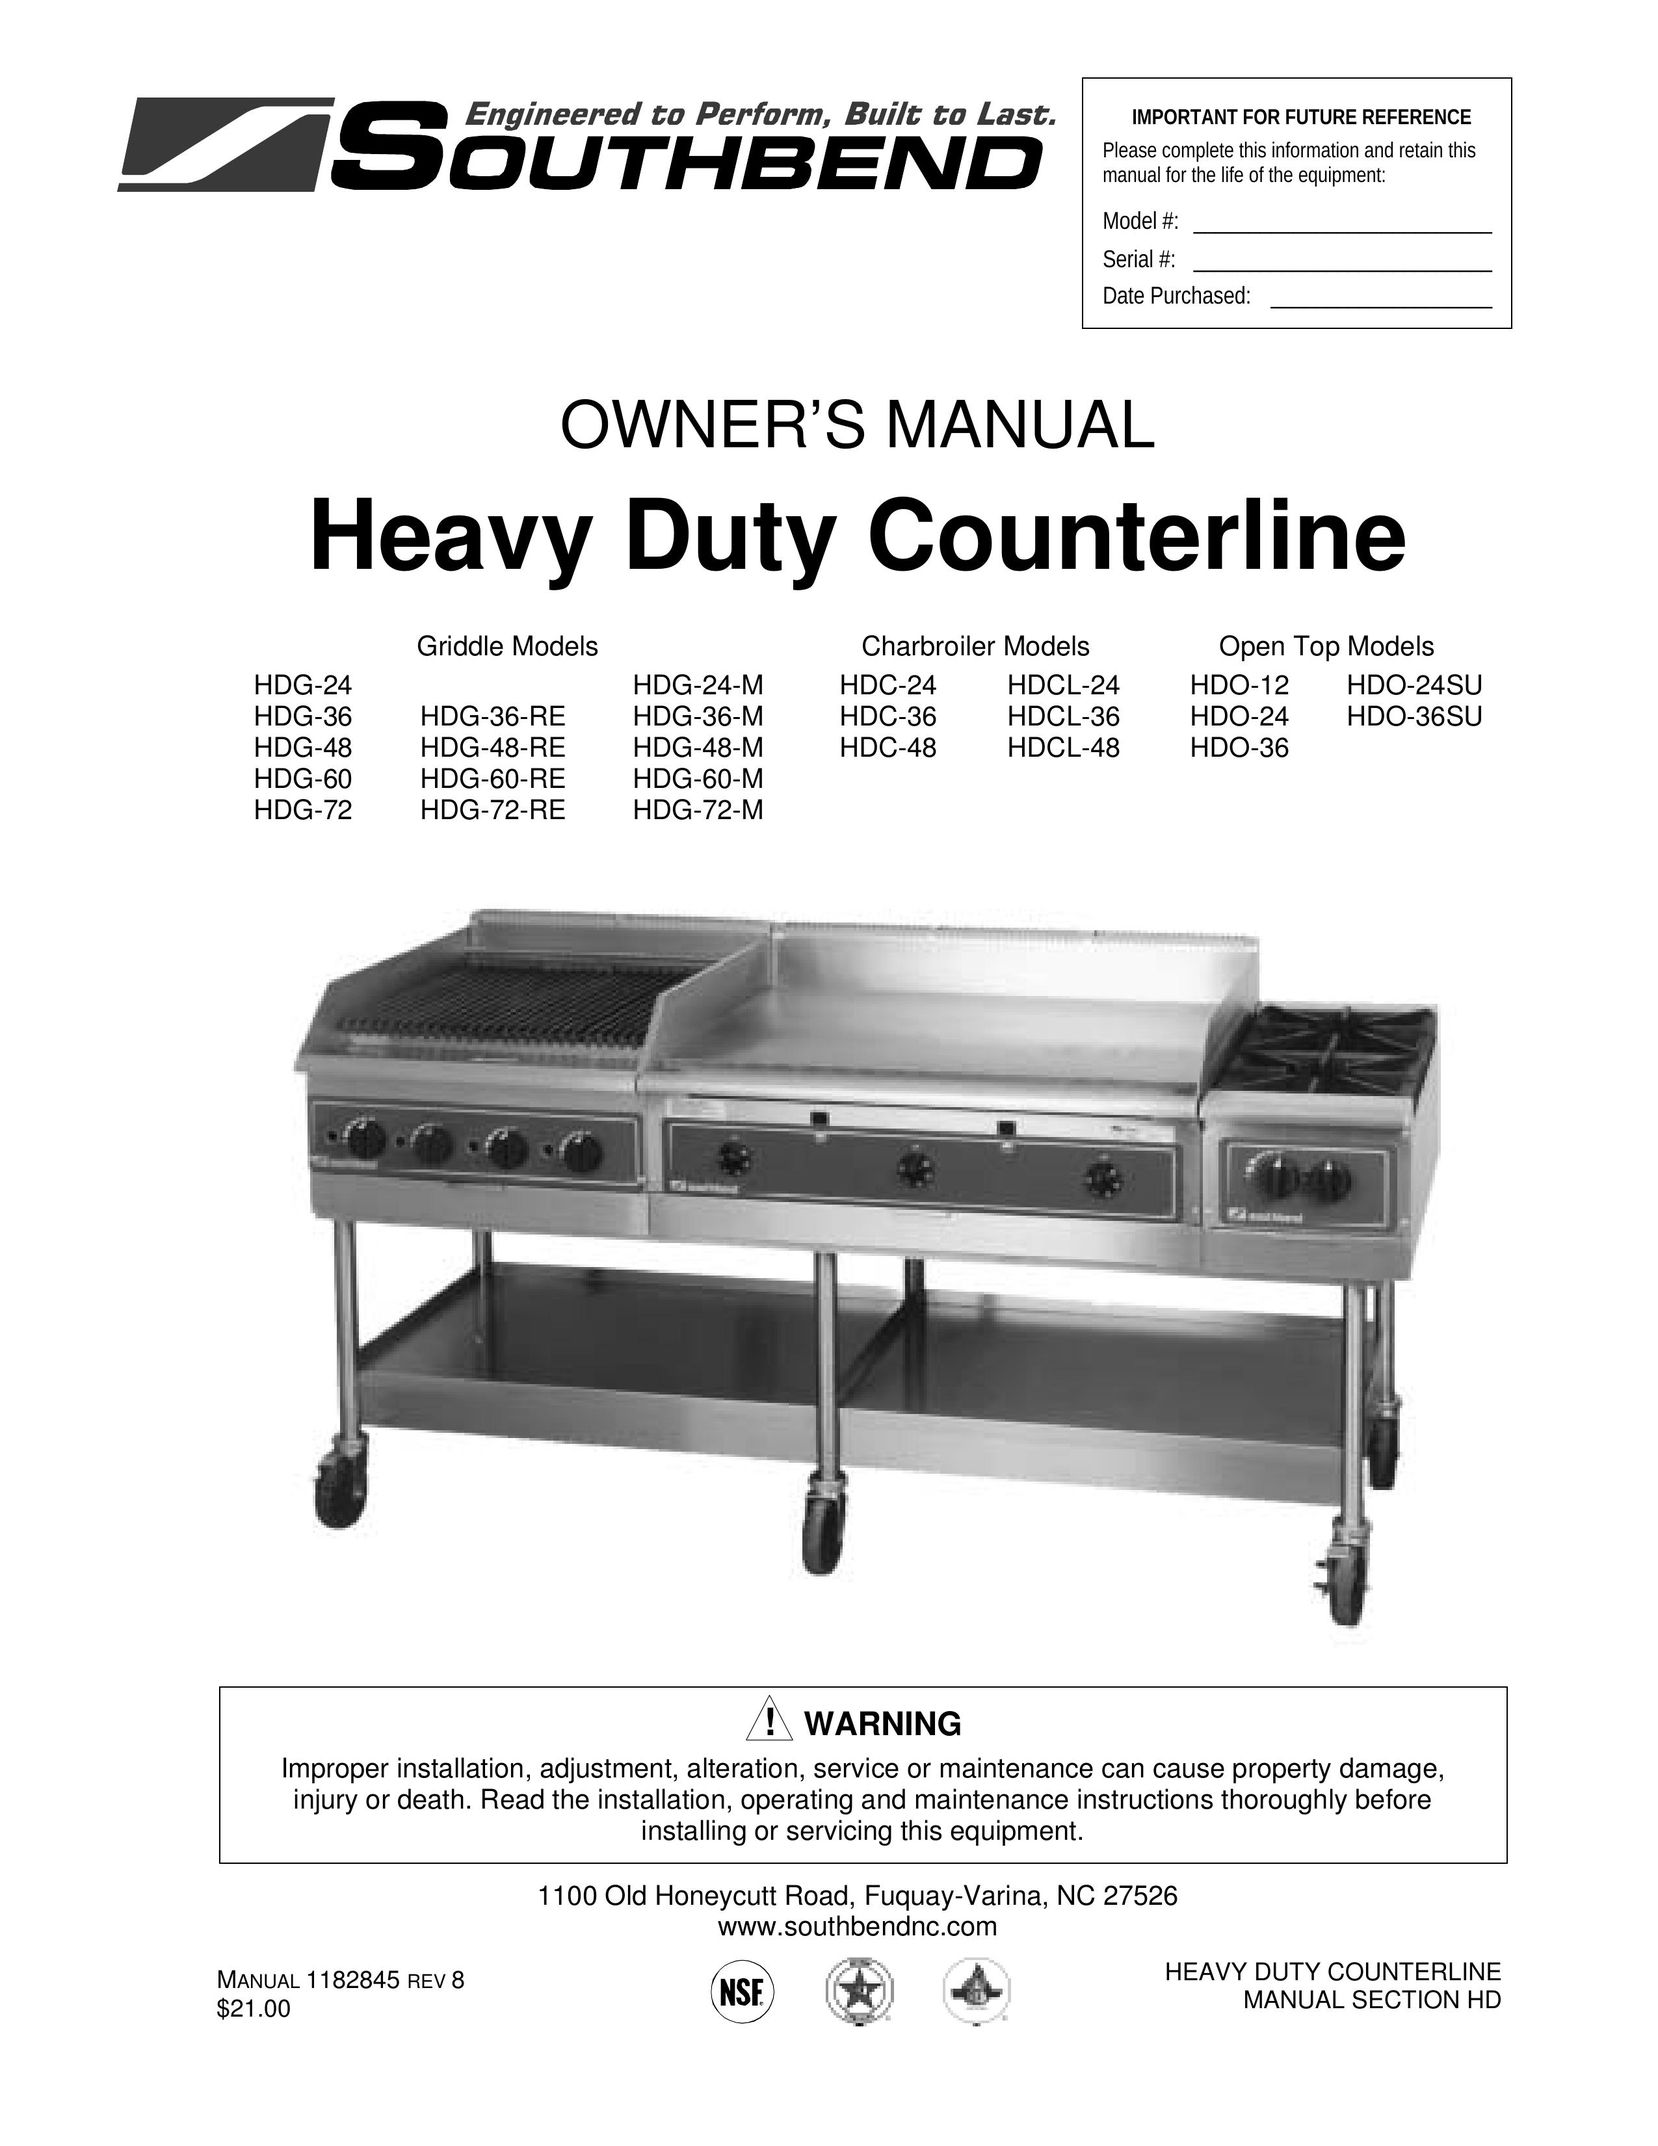 Southbend HDG-36-RE Griddle User Manual